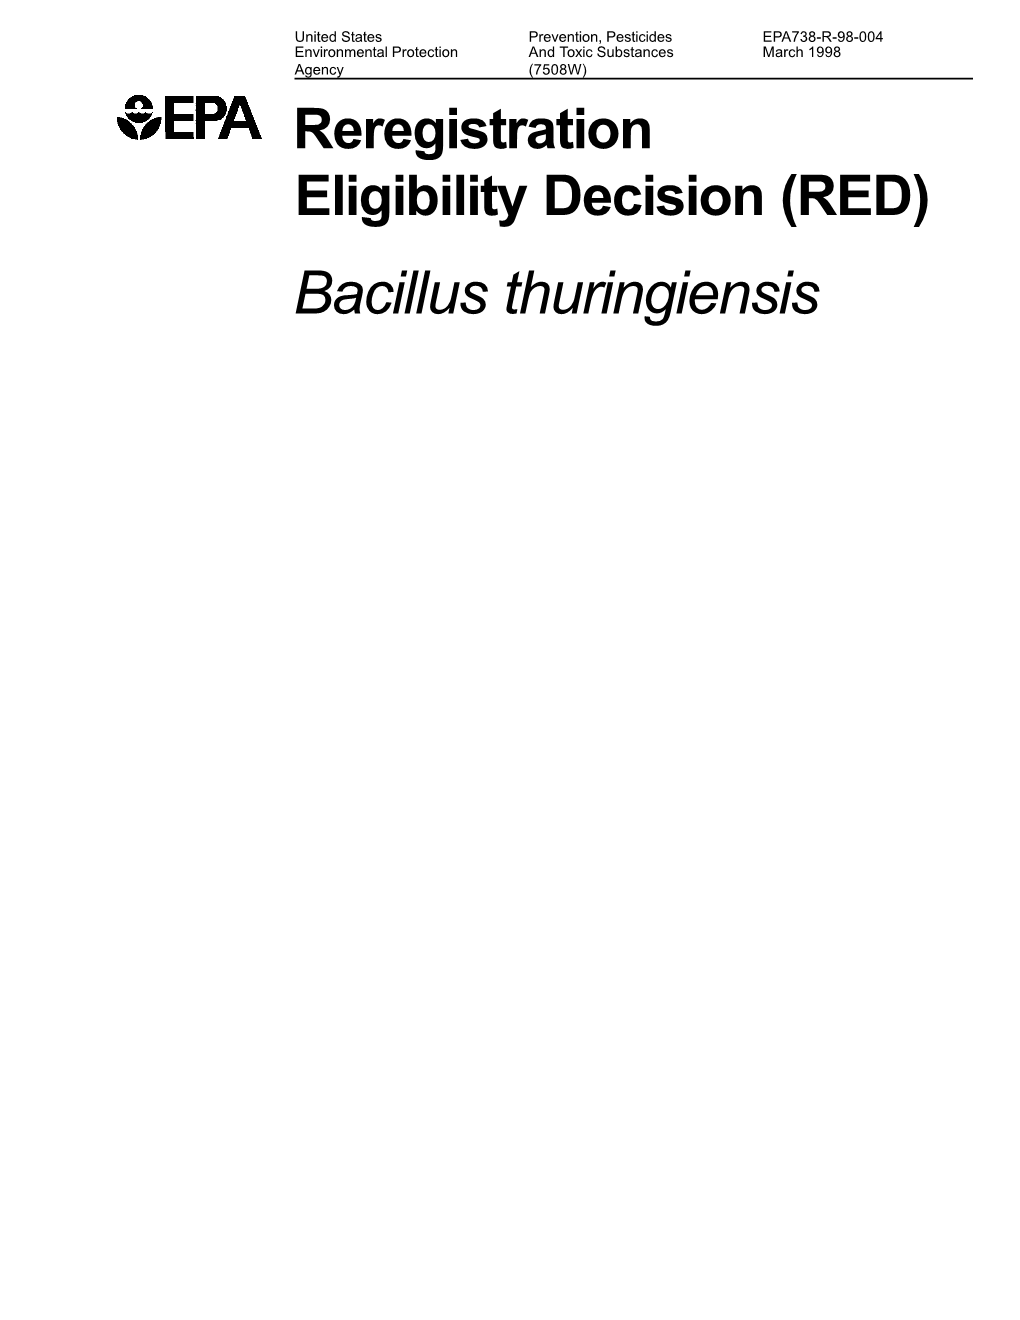 Reregistration Eligibility Decision (RED) for Bacillus Thuringiensis (Bt)